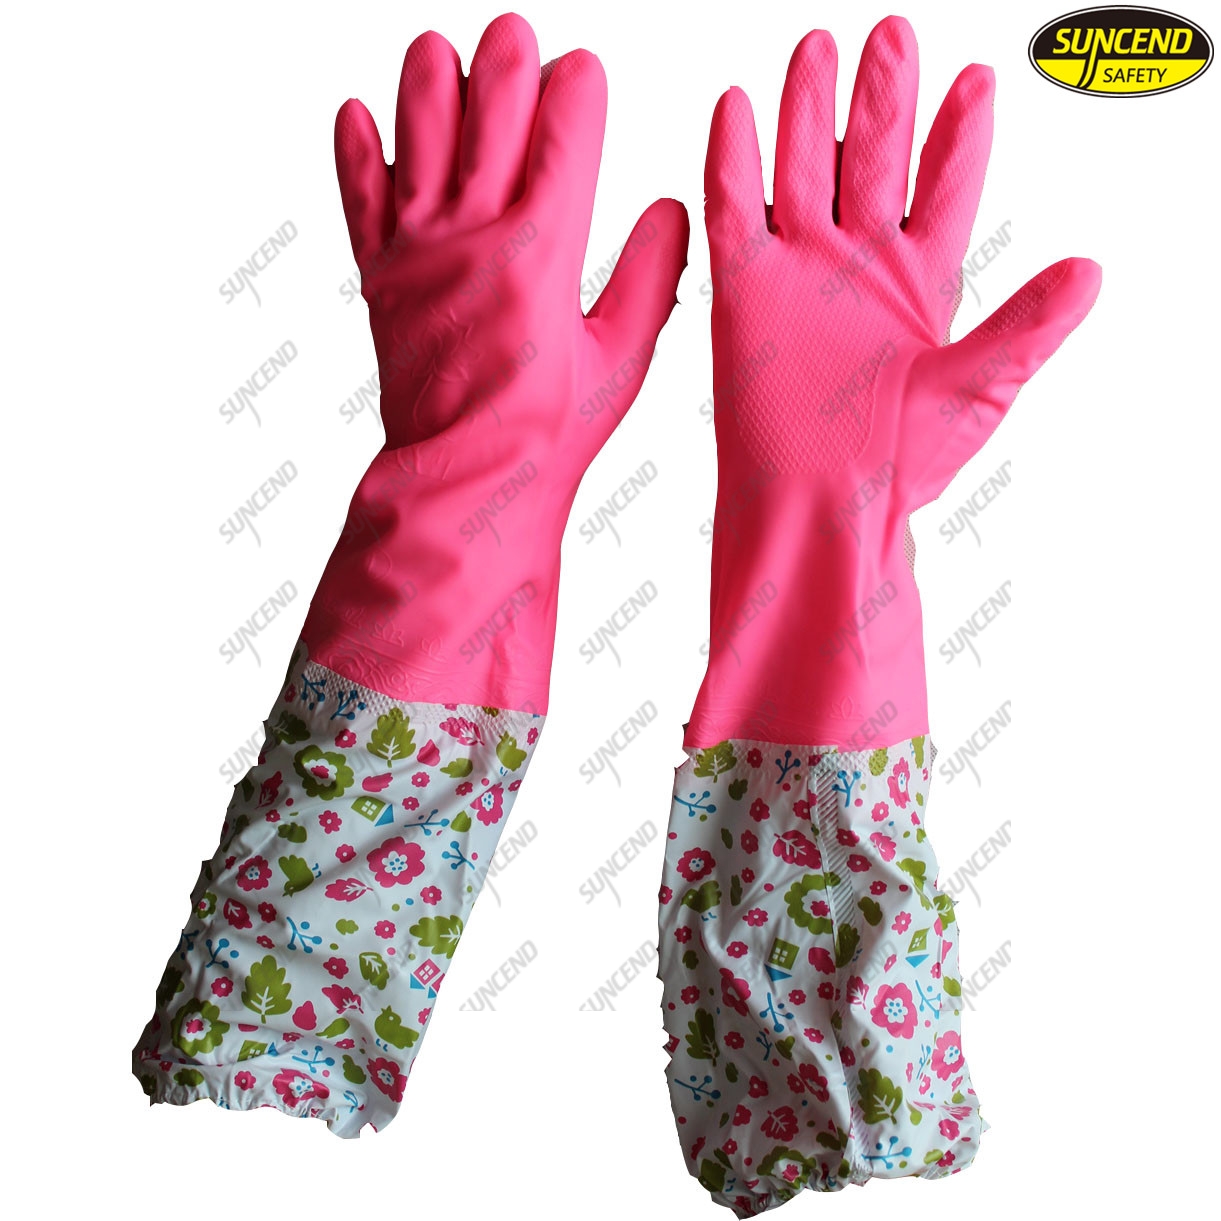 Water resistant latex full coated cleaning household gloves